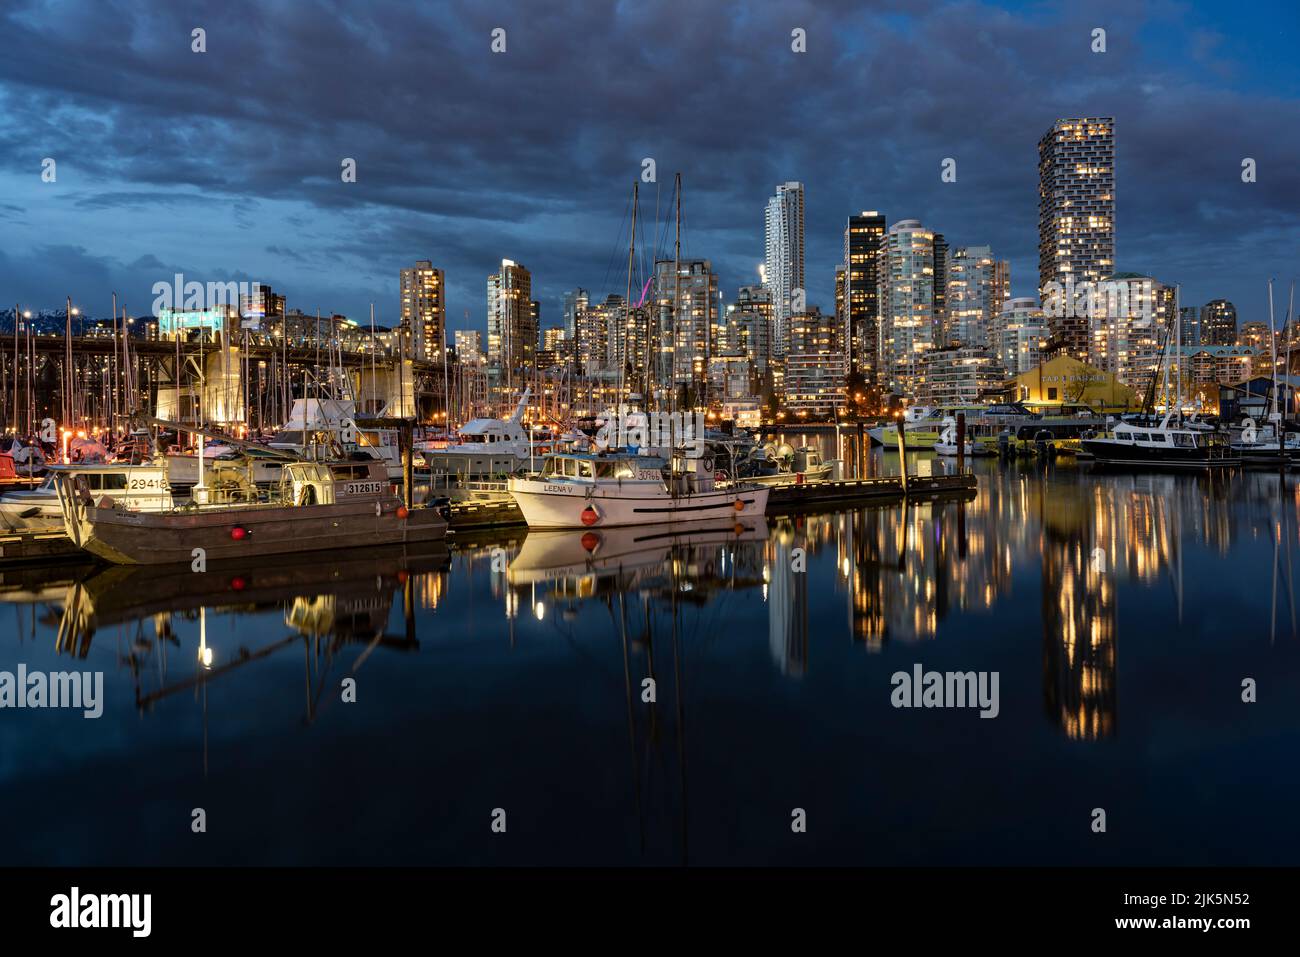 False Creek with reflections of boats and buildings at night, in Vancouver, British Columbia, Canada. Stock Photo